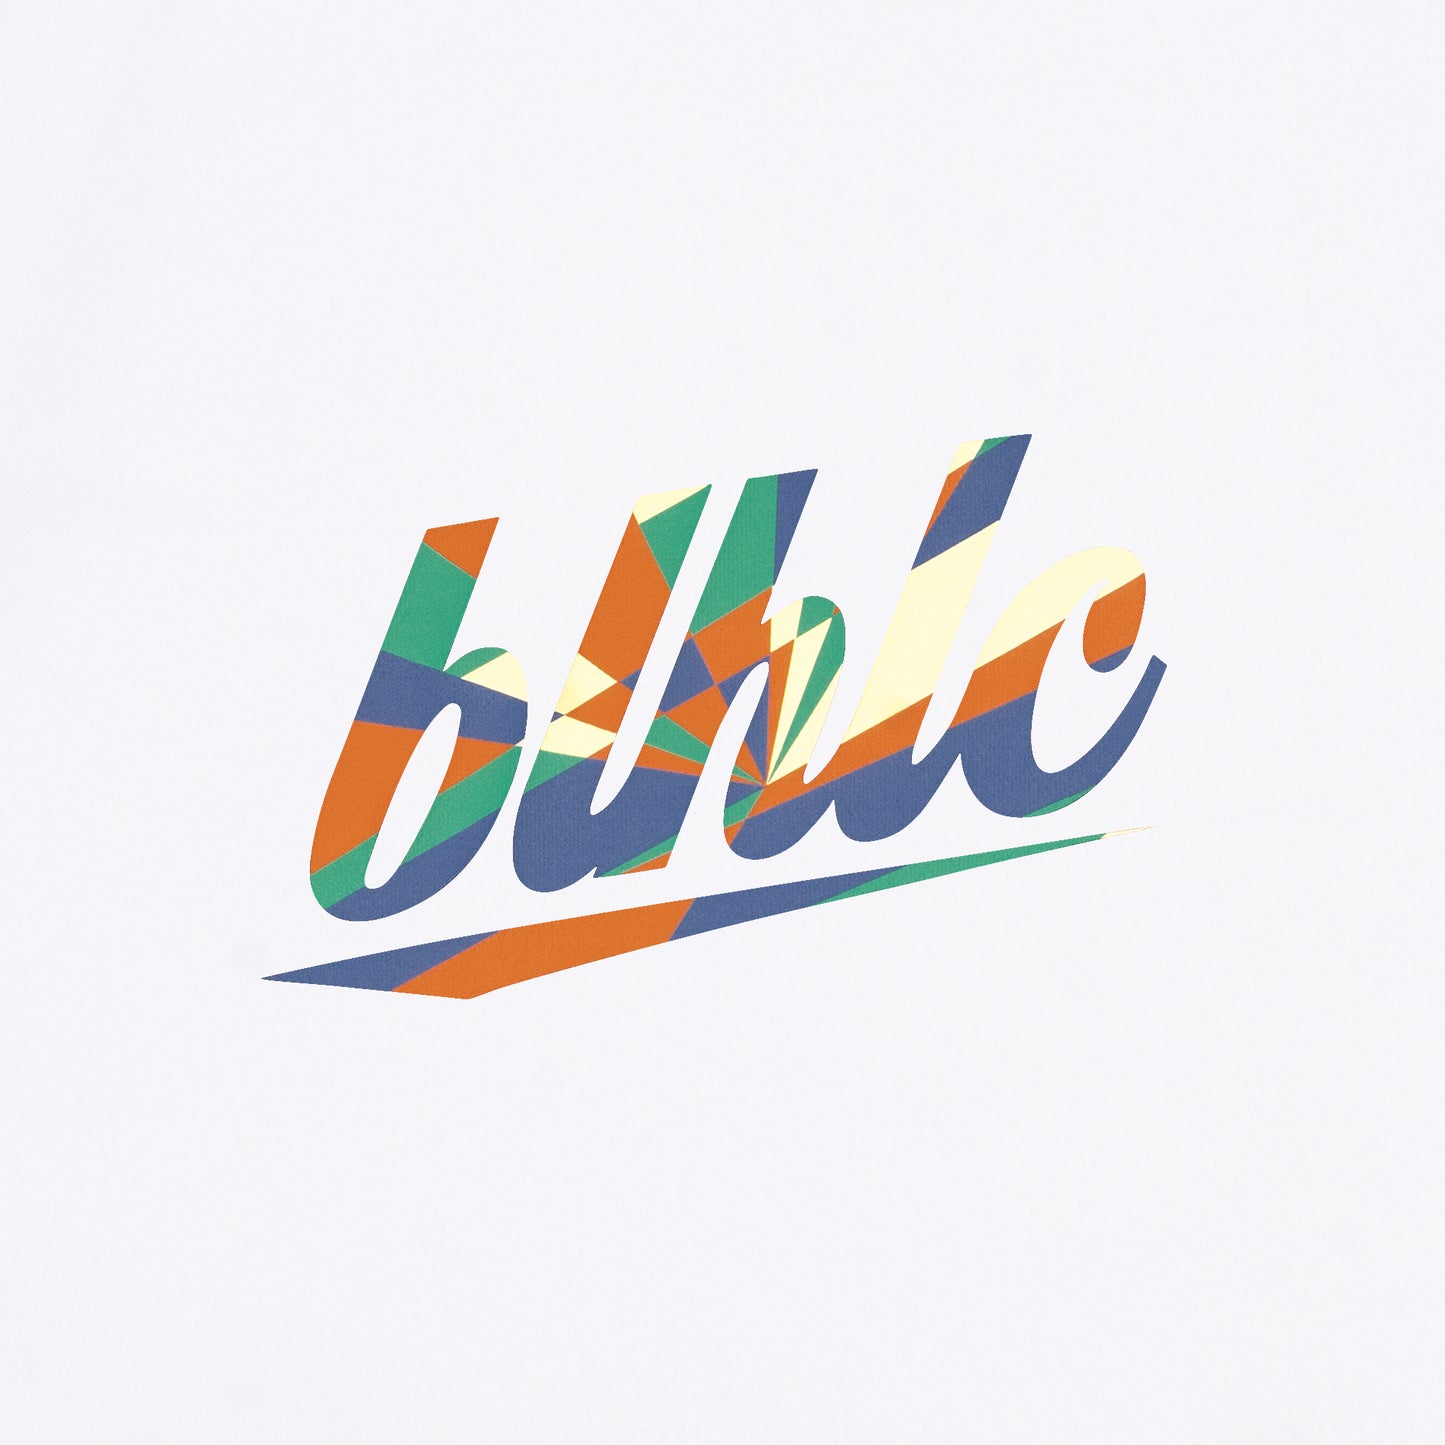 blhlc Back Print Cool Tee (white/east)